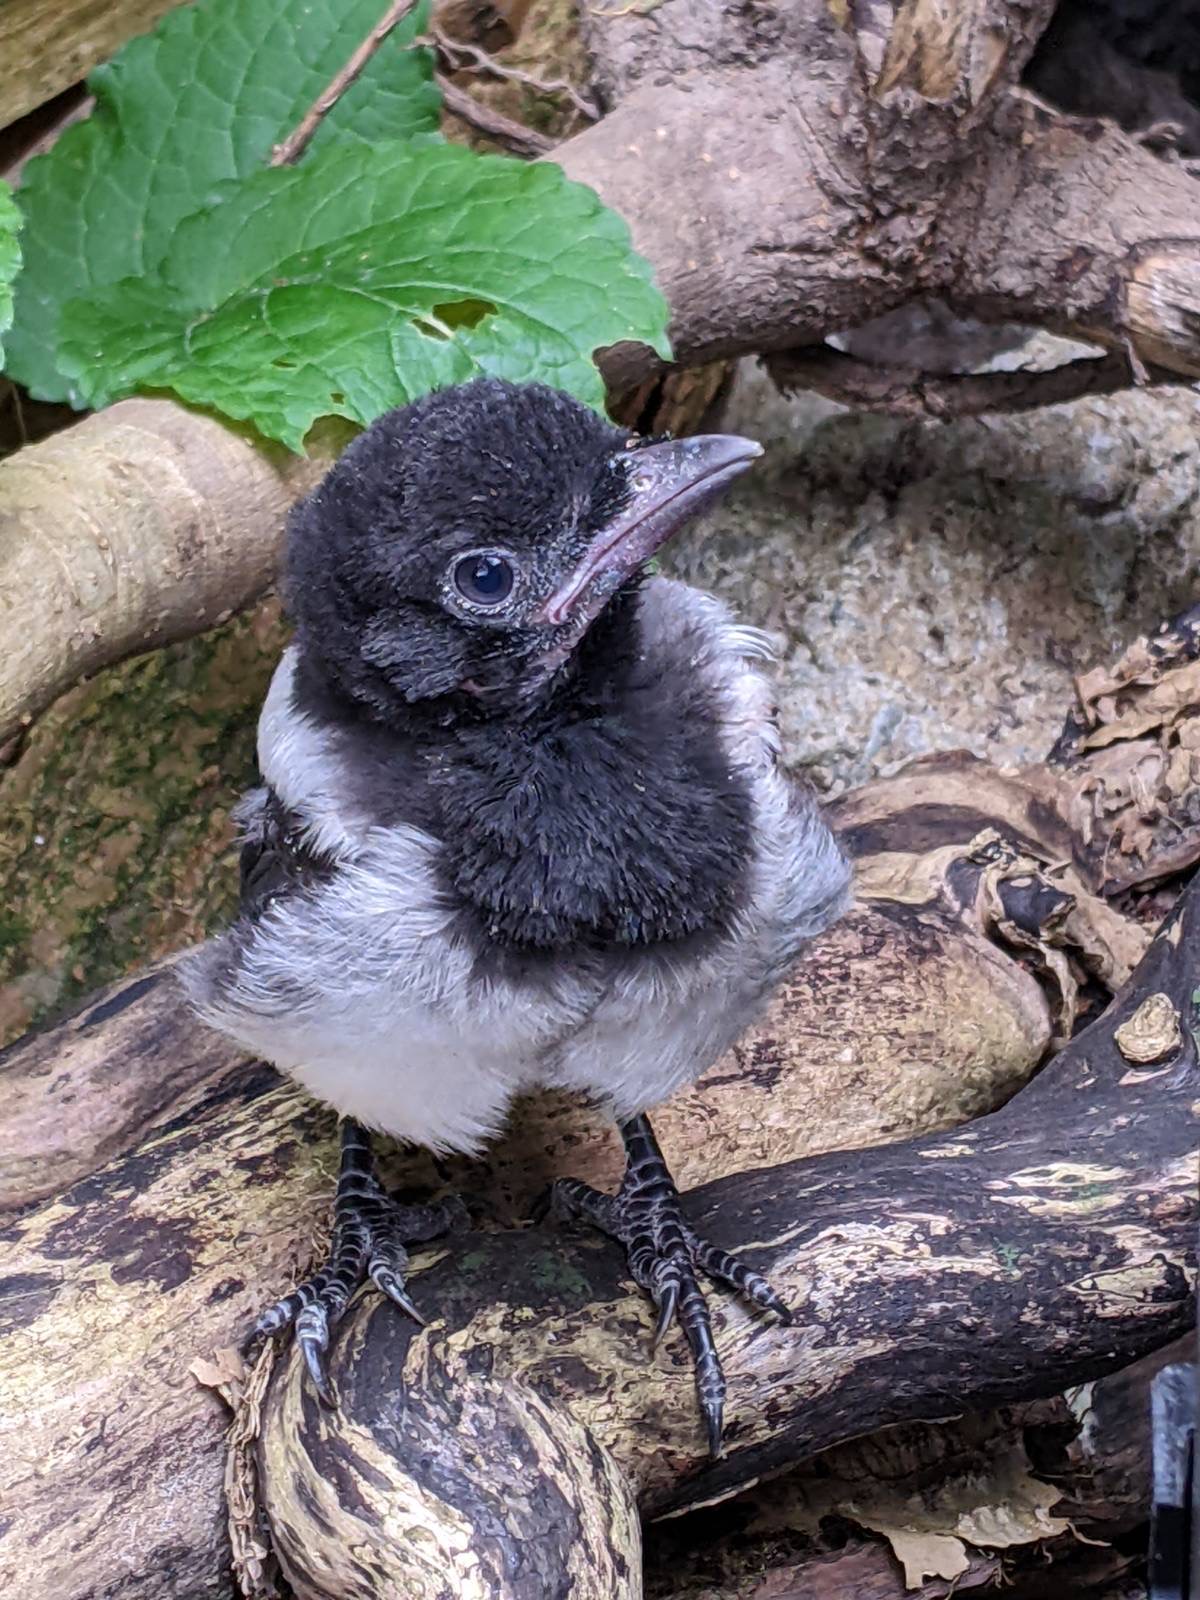 A fledgling magpie among twigs and leaves.